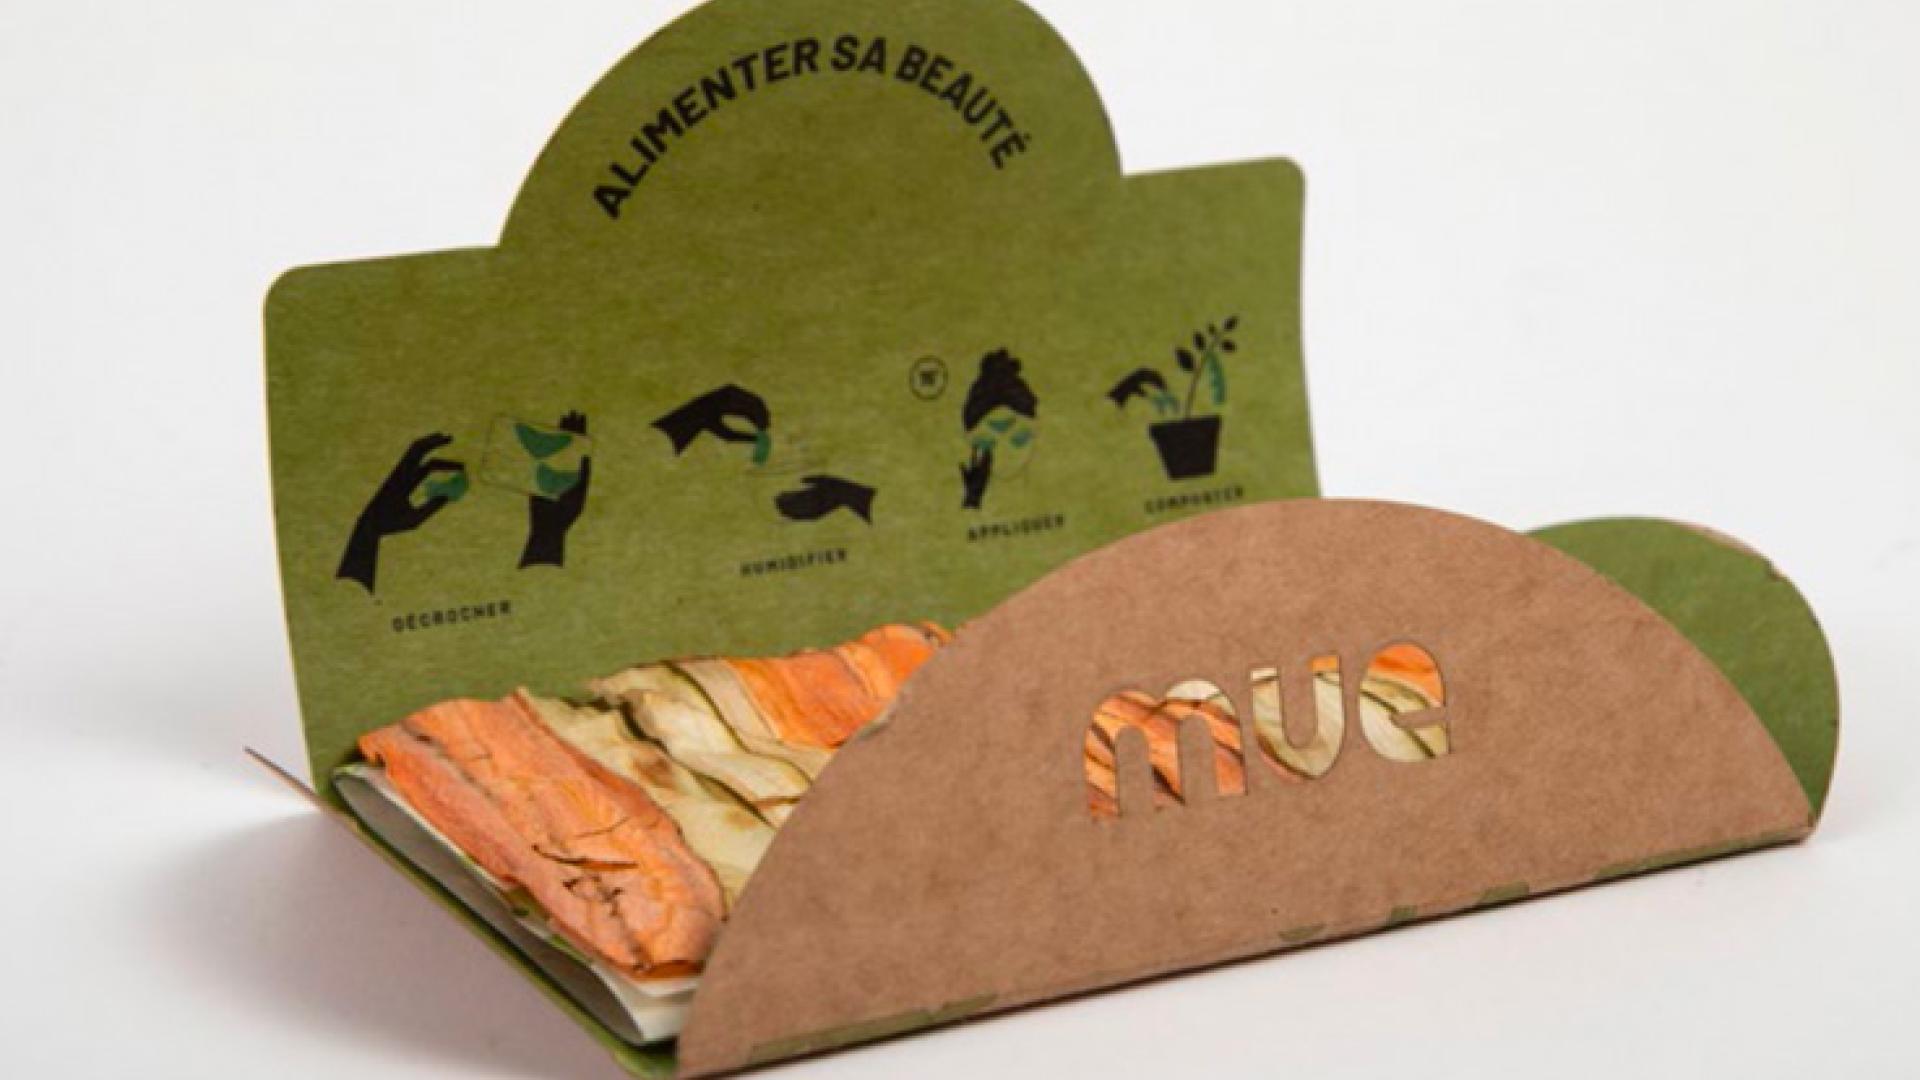 Vegetable beauty patch, edible and compostable, made from dehydrated vegetable bio-waste